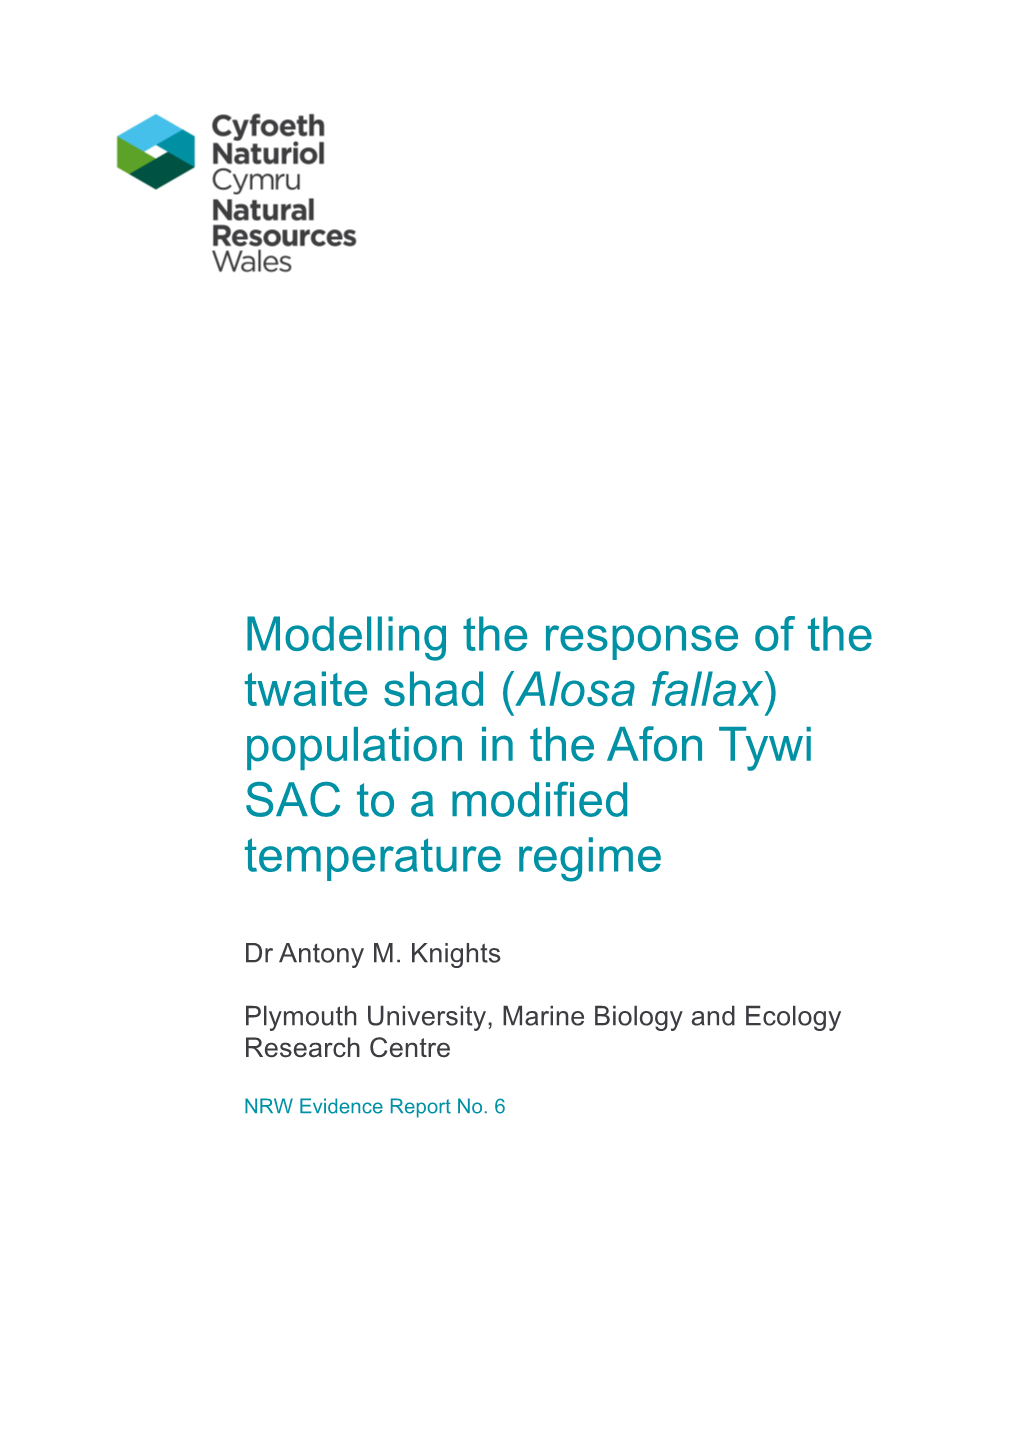 Modelling the Response of the Twaite Shad (Alosa Fallax) Population in the Afon Tywi SAC to a Modified Temperature Regime